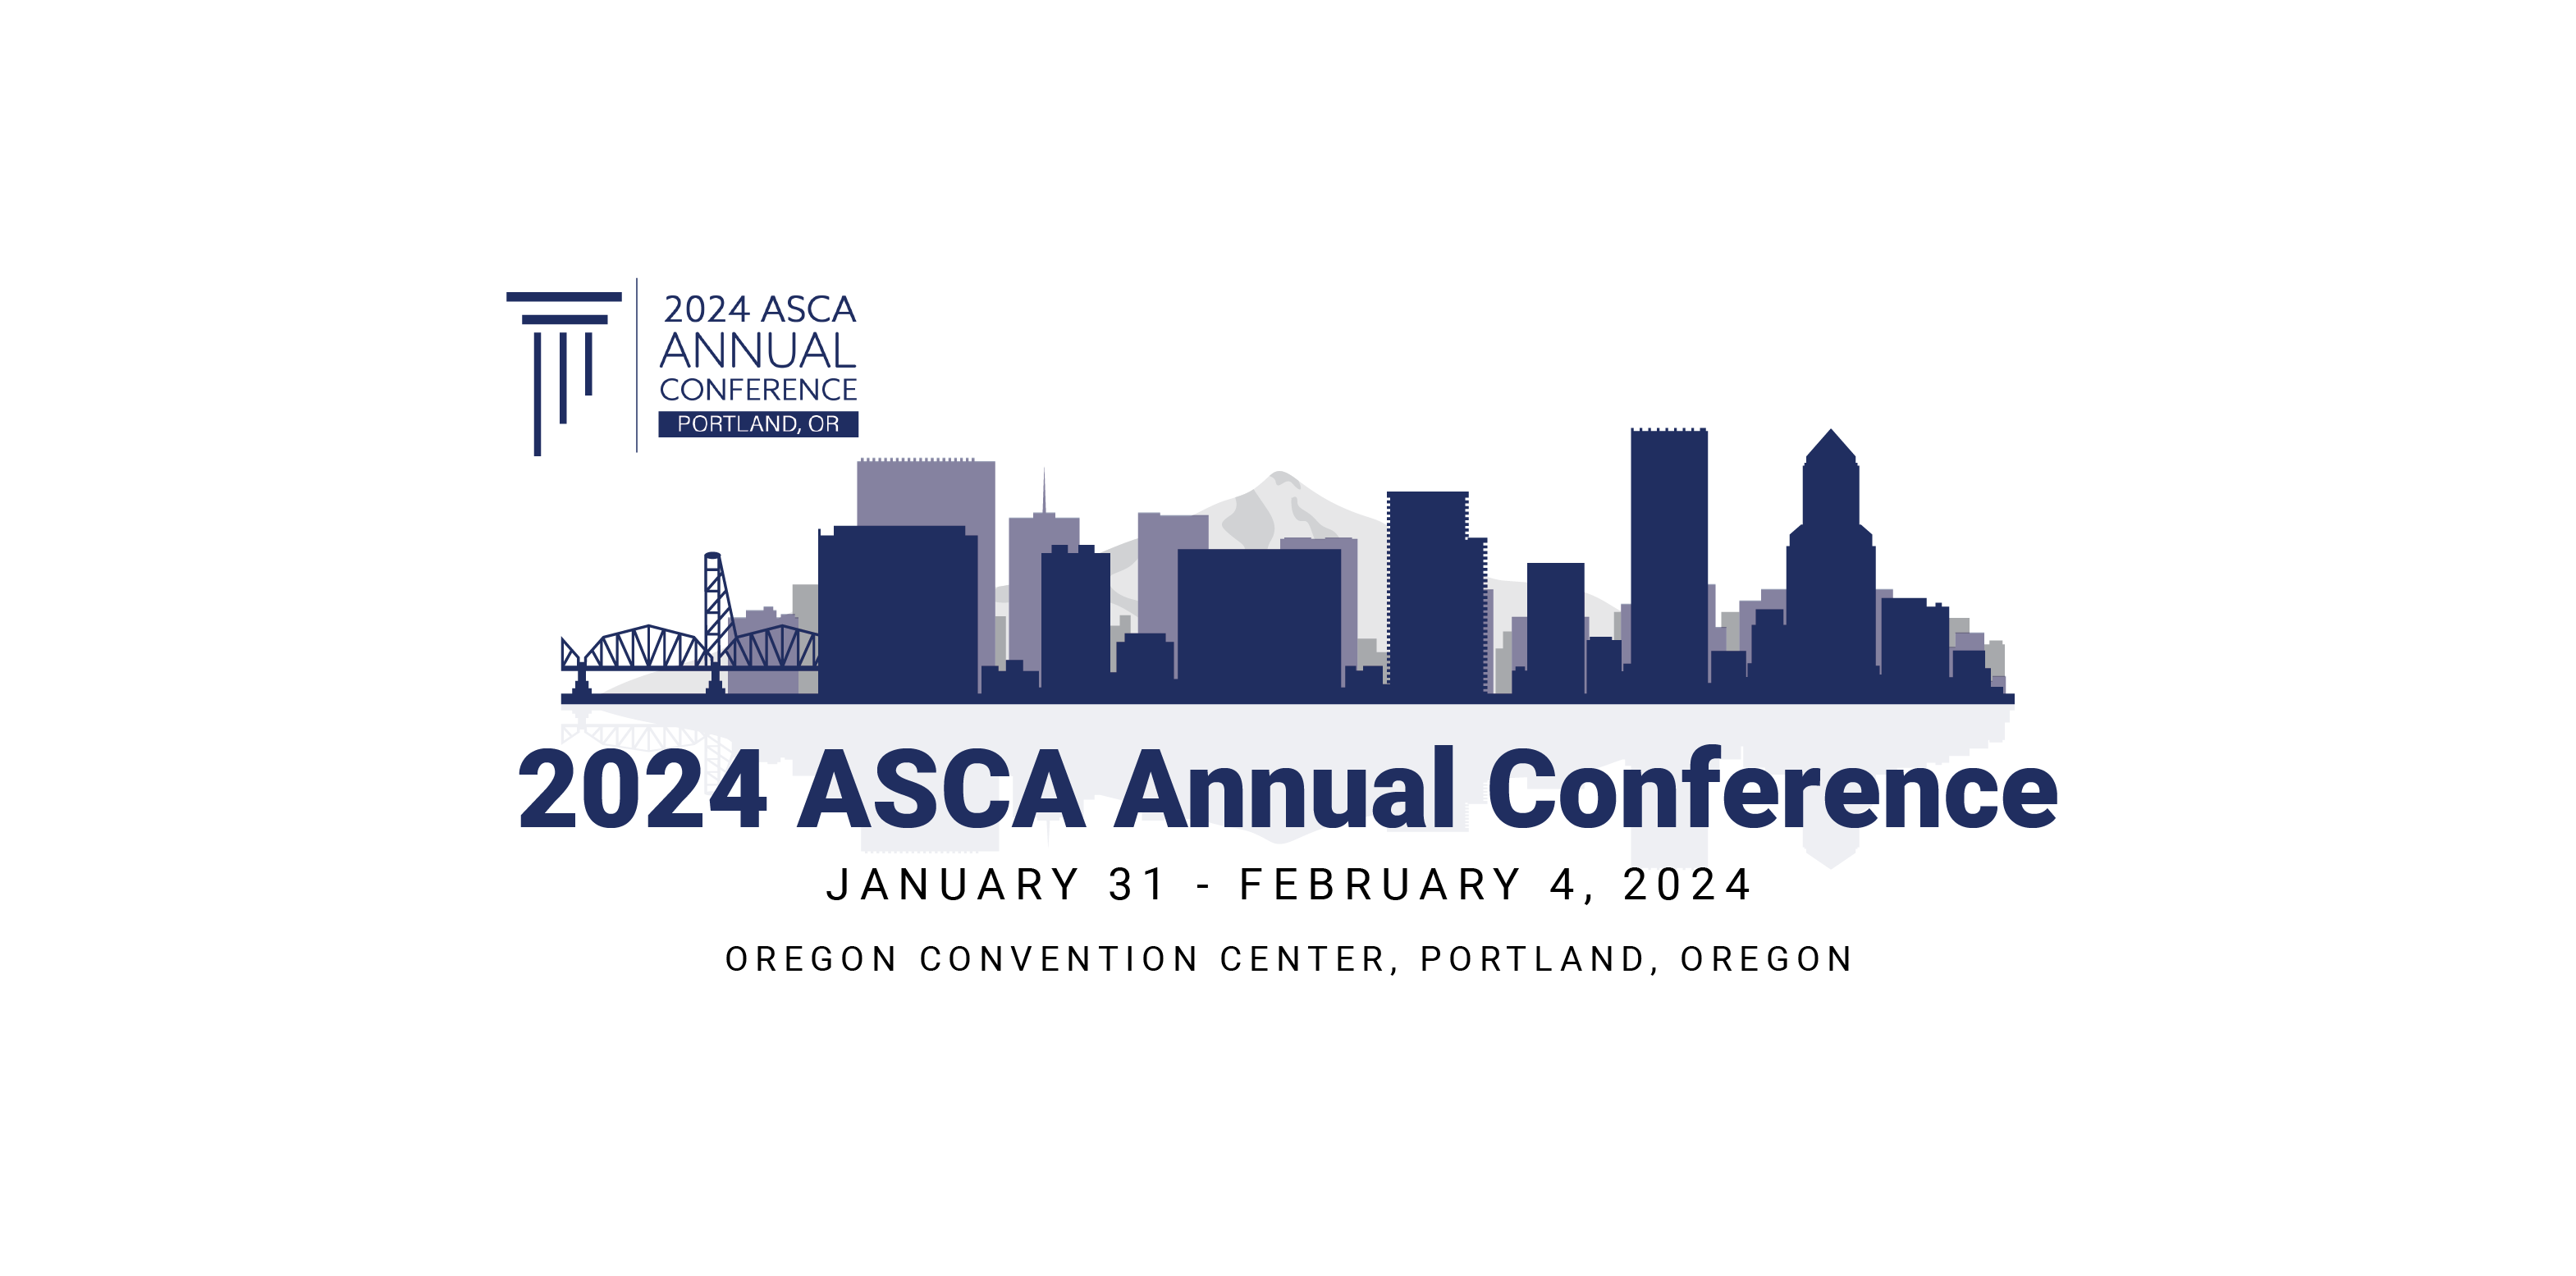 ASCA Conference 2024 Association for Student Conduct Administration 2024 Annual Conference